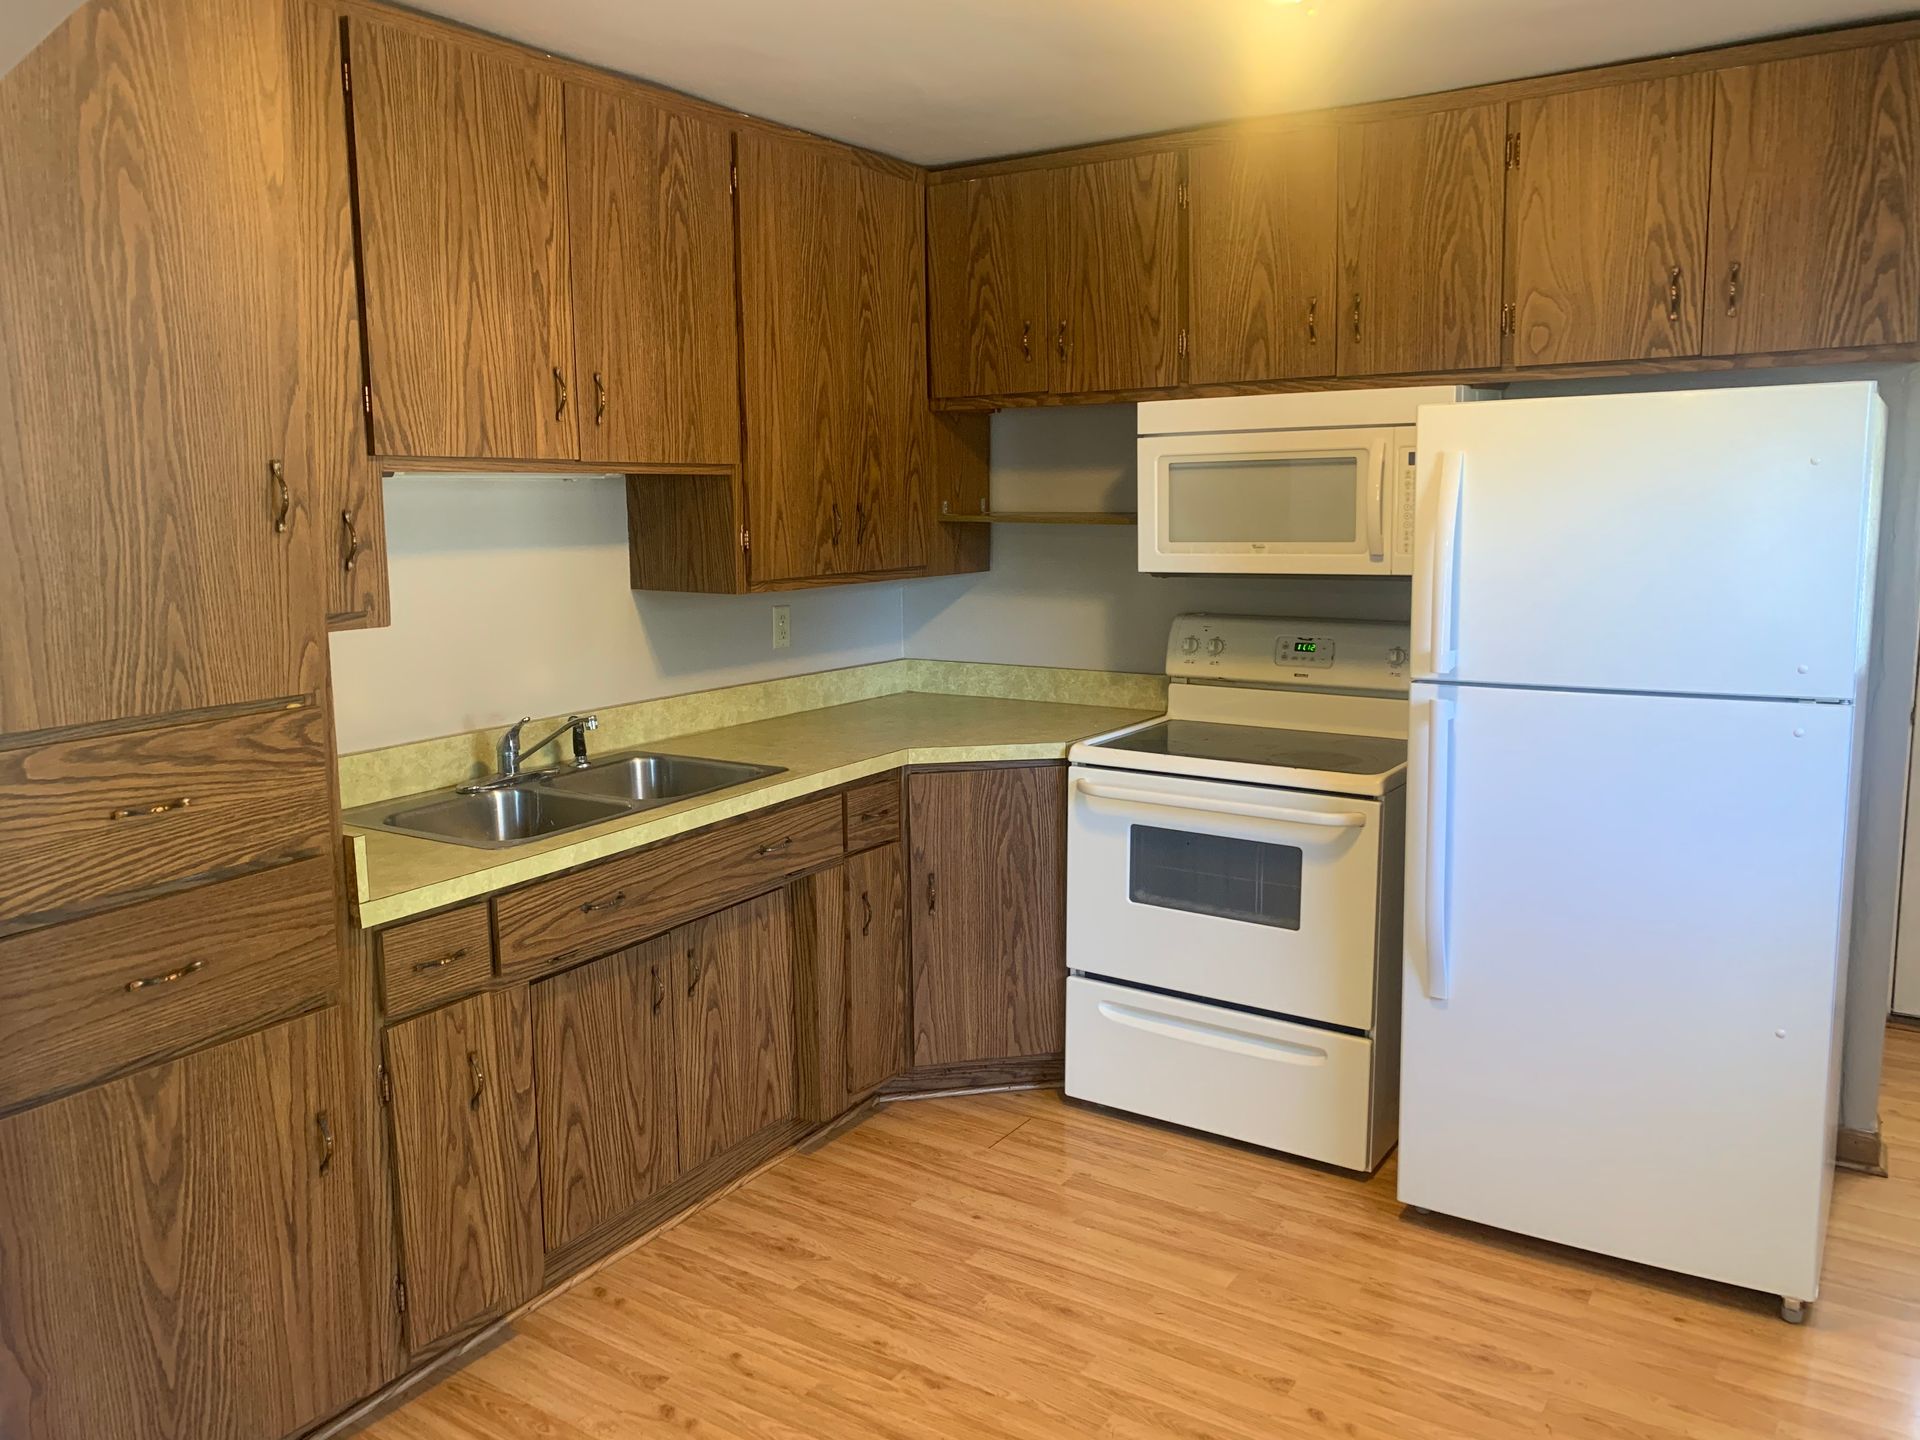 A kitchen with wooden cabinets , a white refrigerator , stove and microwave.